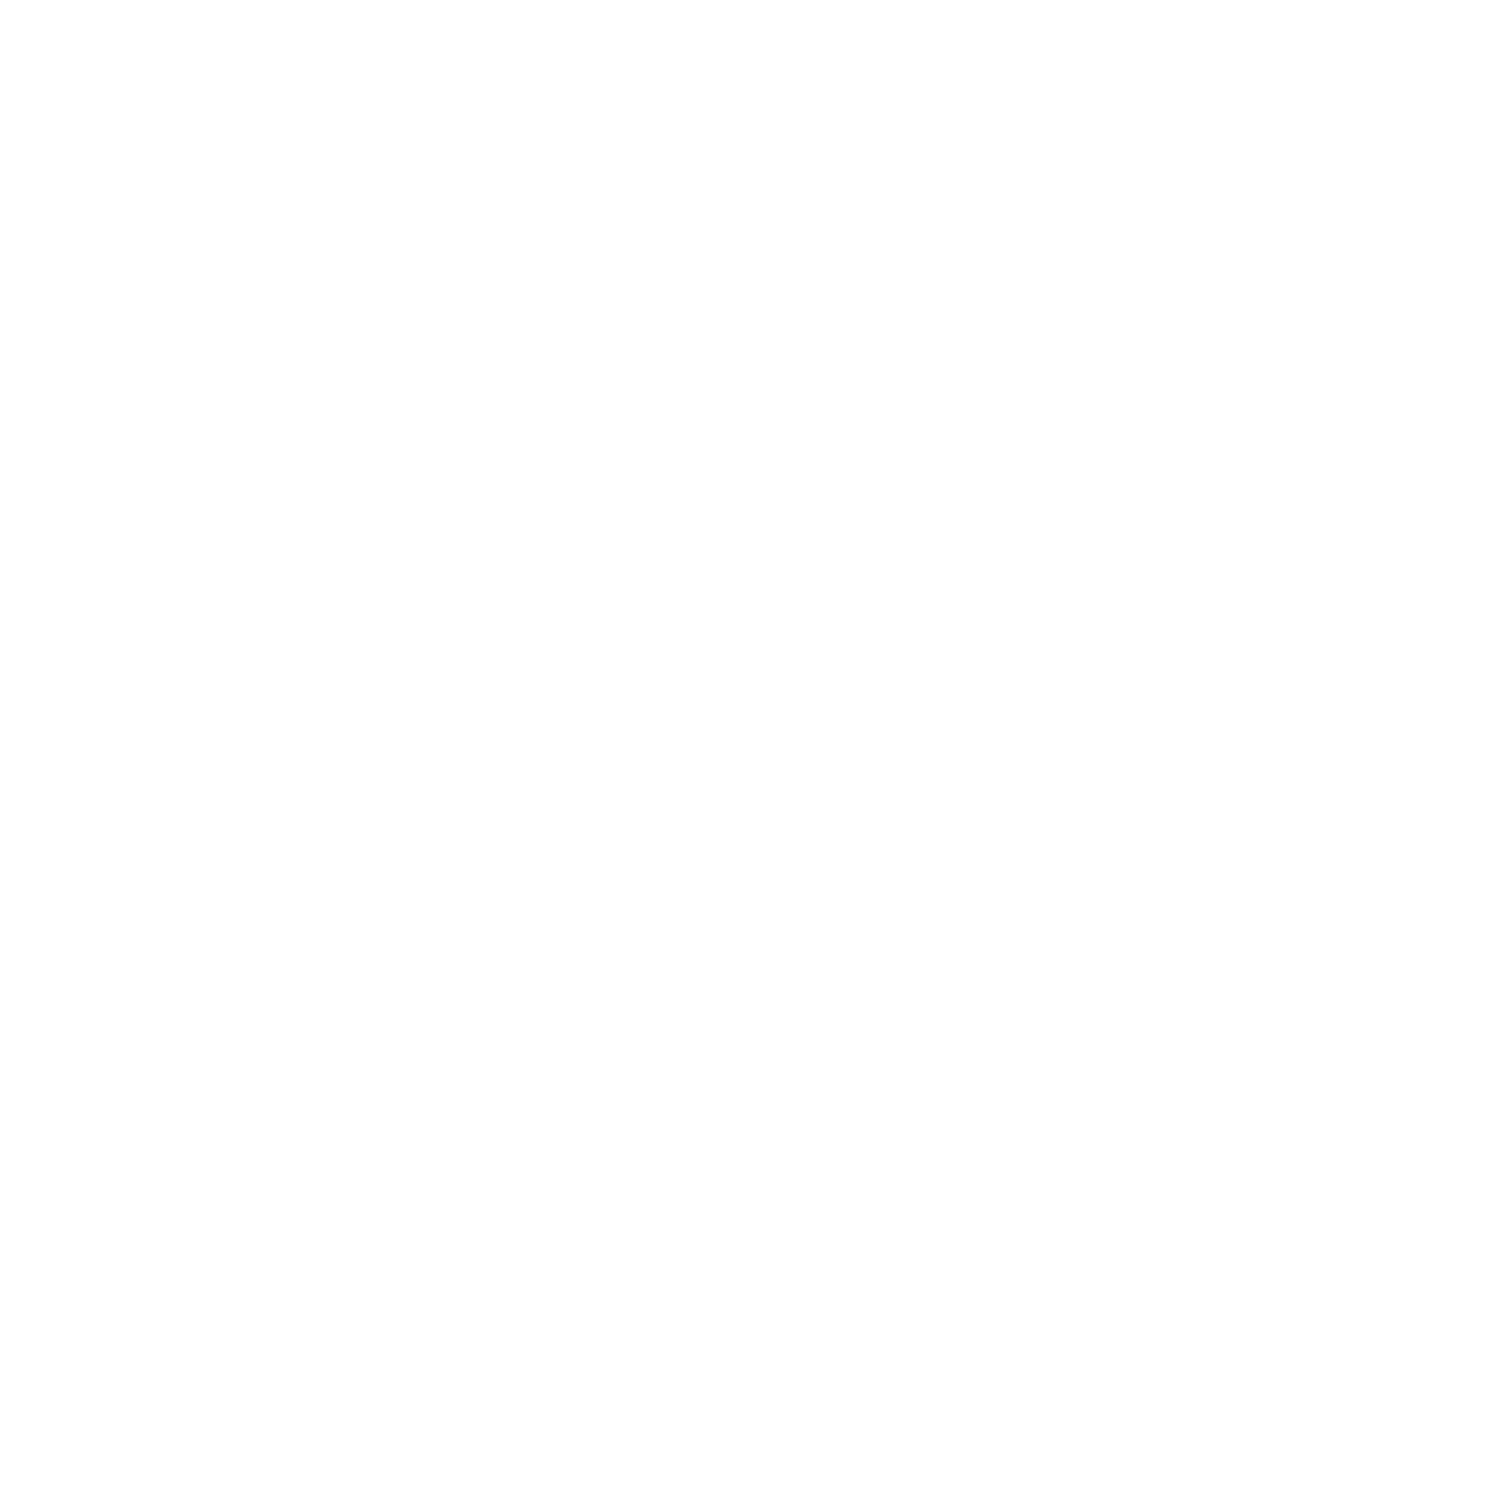 Caan Rose Estates Ltd - Slough : Letting agents in Southall Greater London Ealing